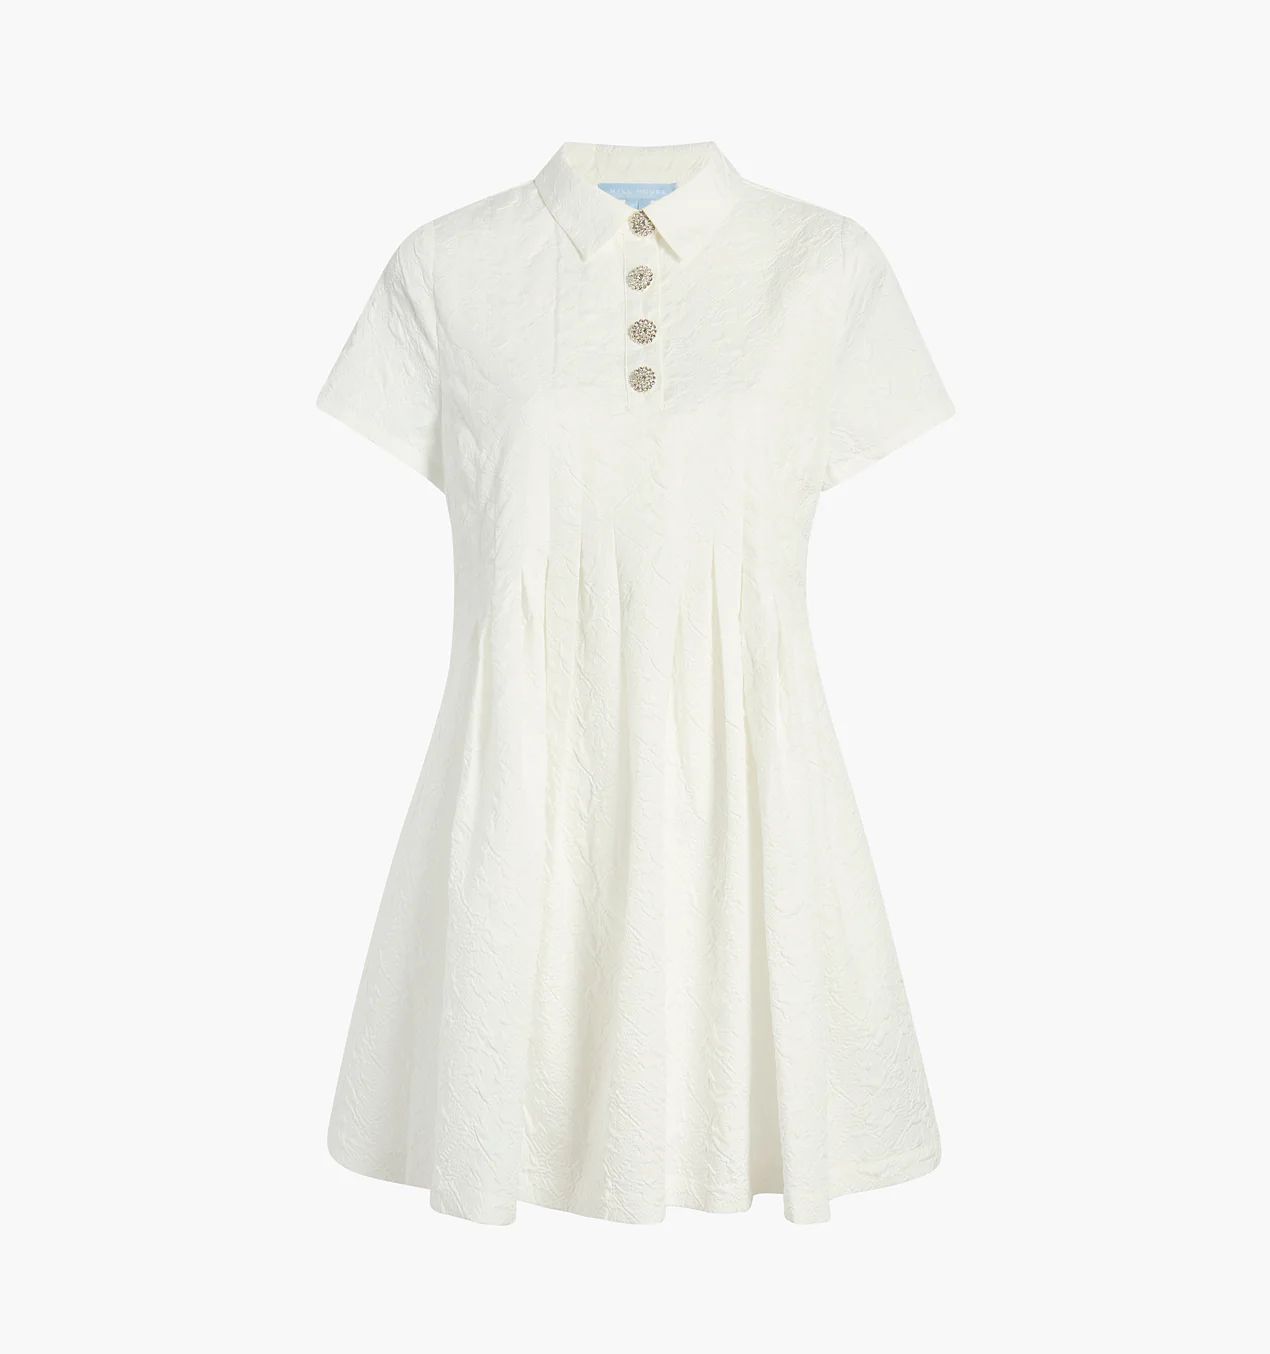 The Rosalind Dress - Winter White Puffy Jacquard | Hill House Home